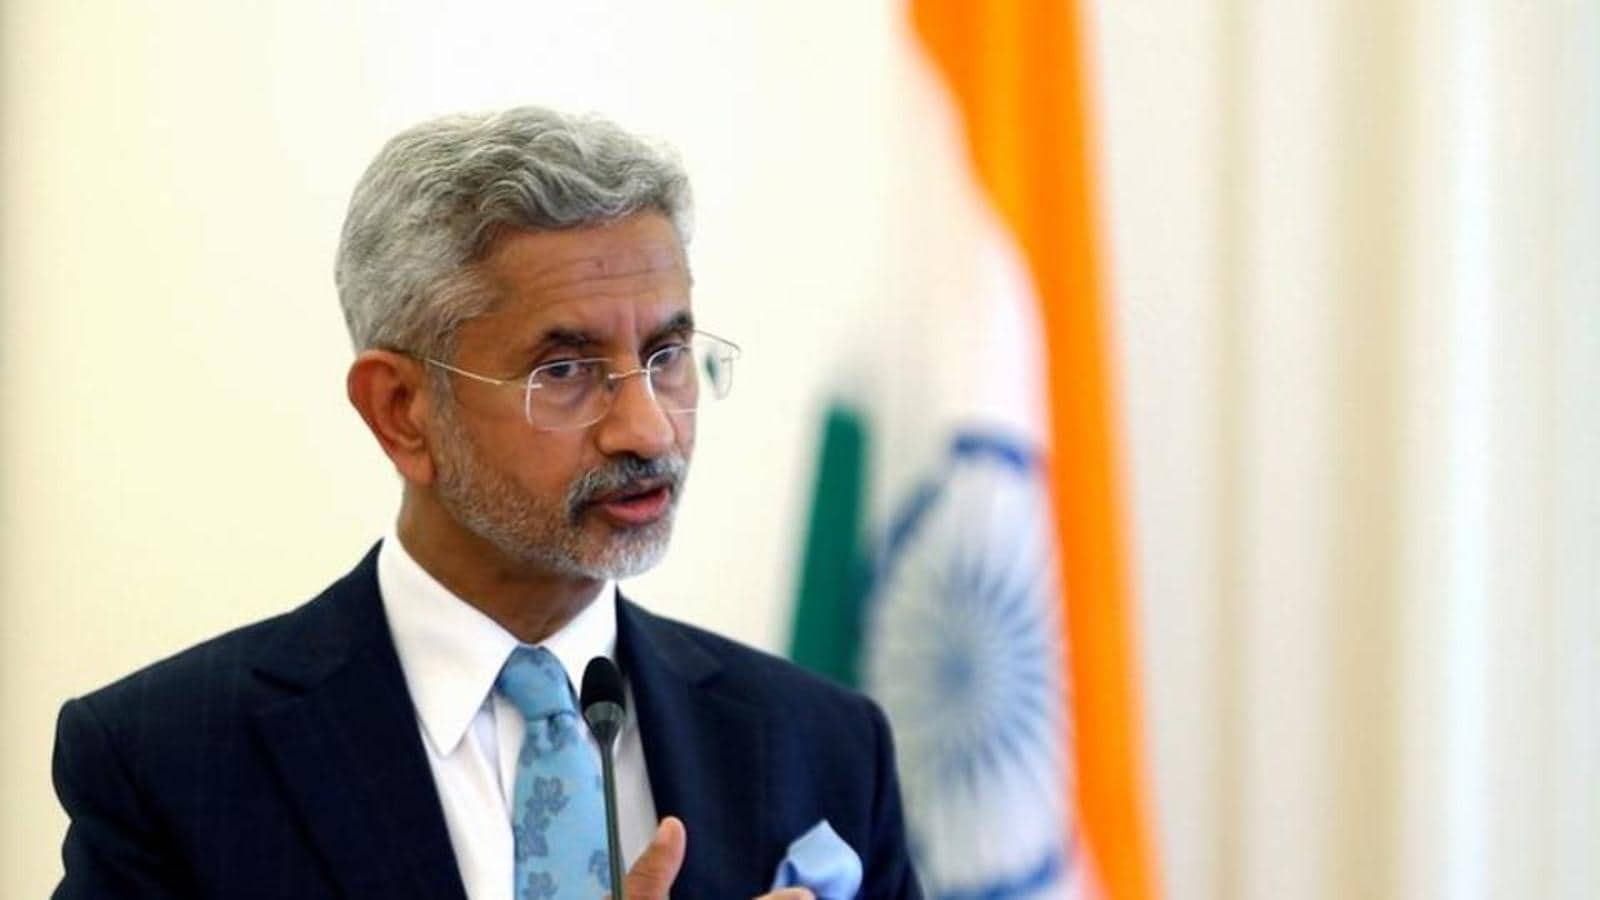 After Erdogan mentions Kashmir in UNGA, Jaishankar says important to respect UN resolutions on Cyprus